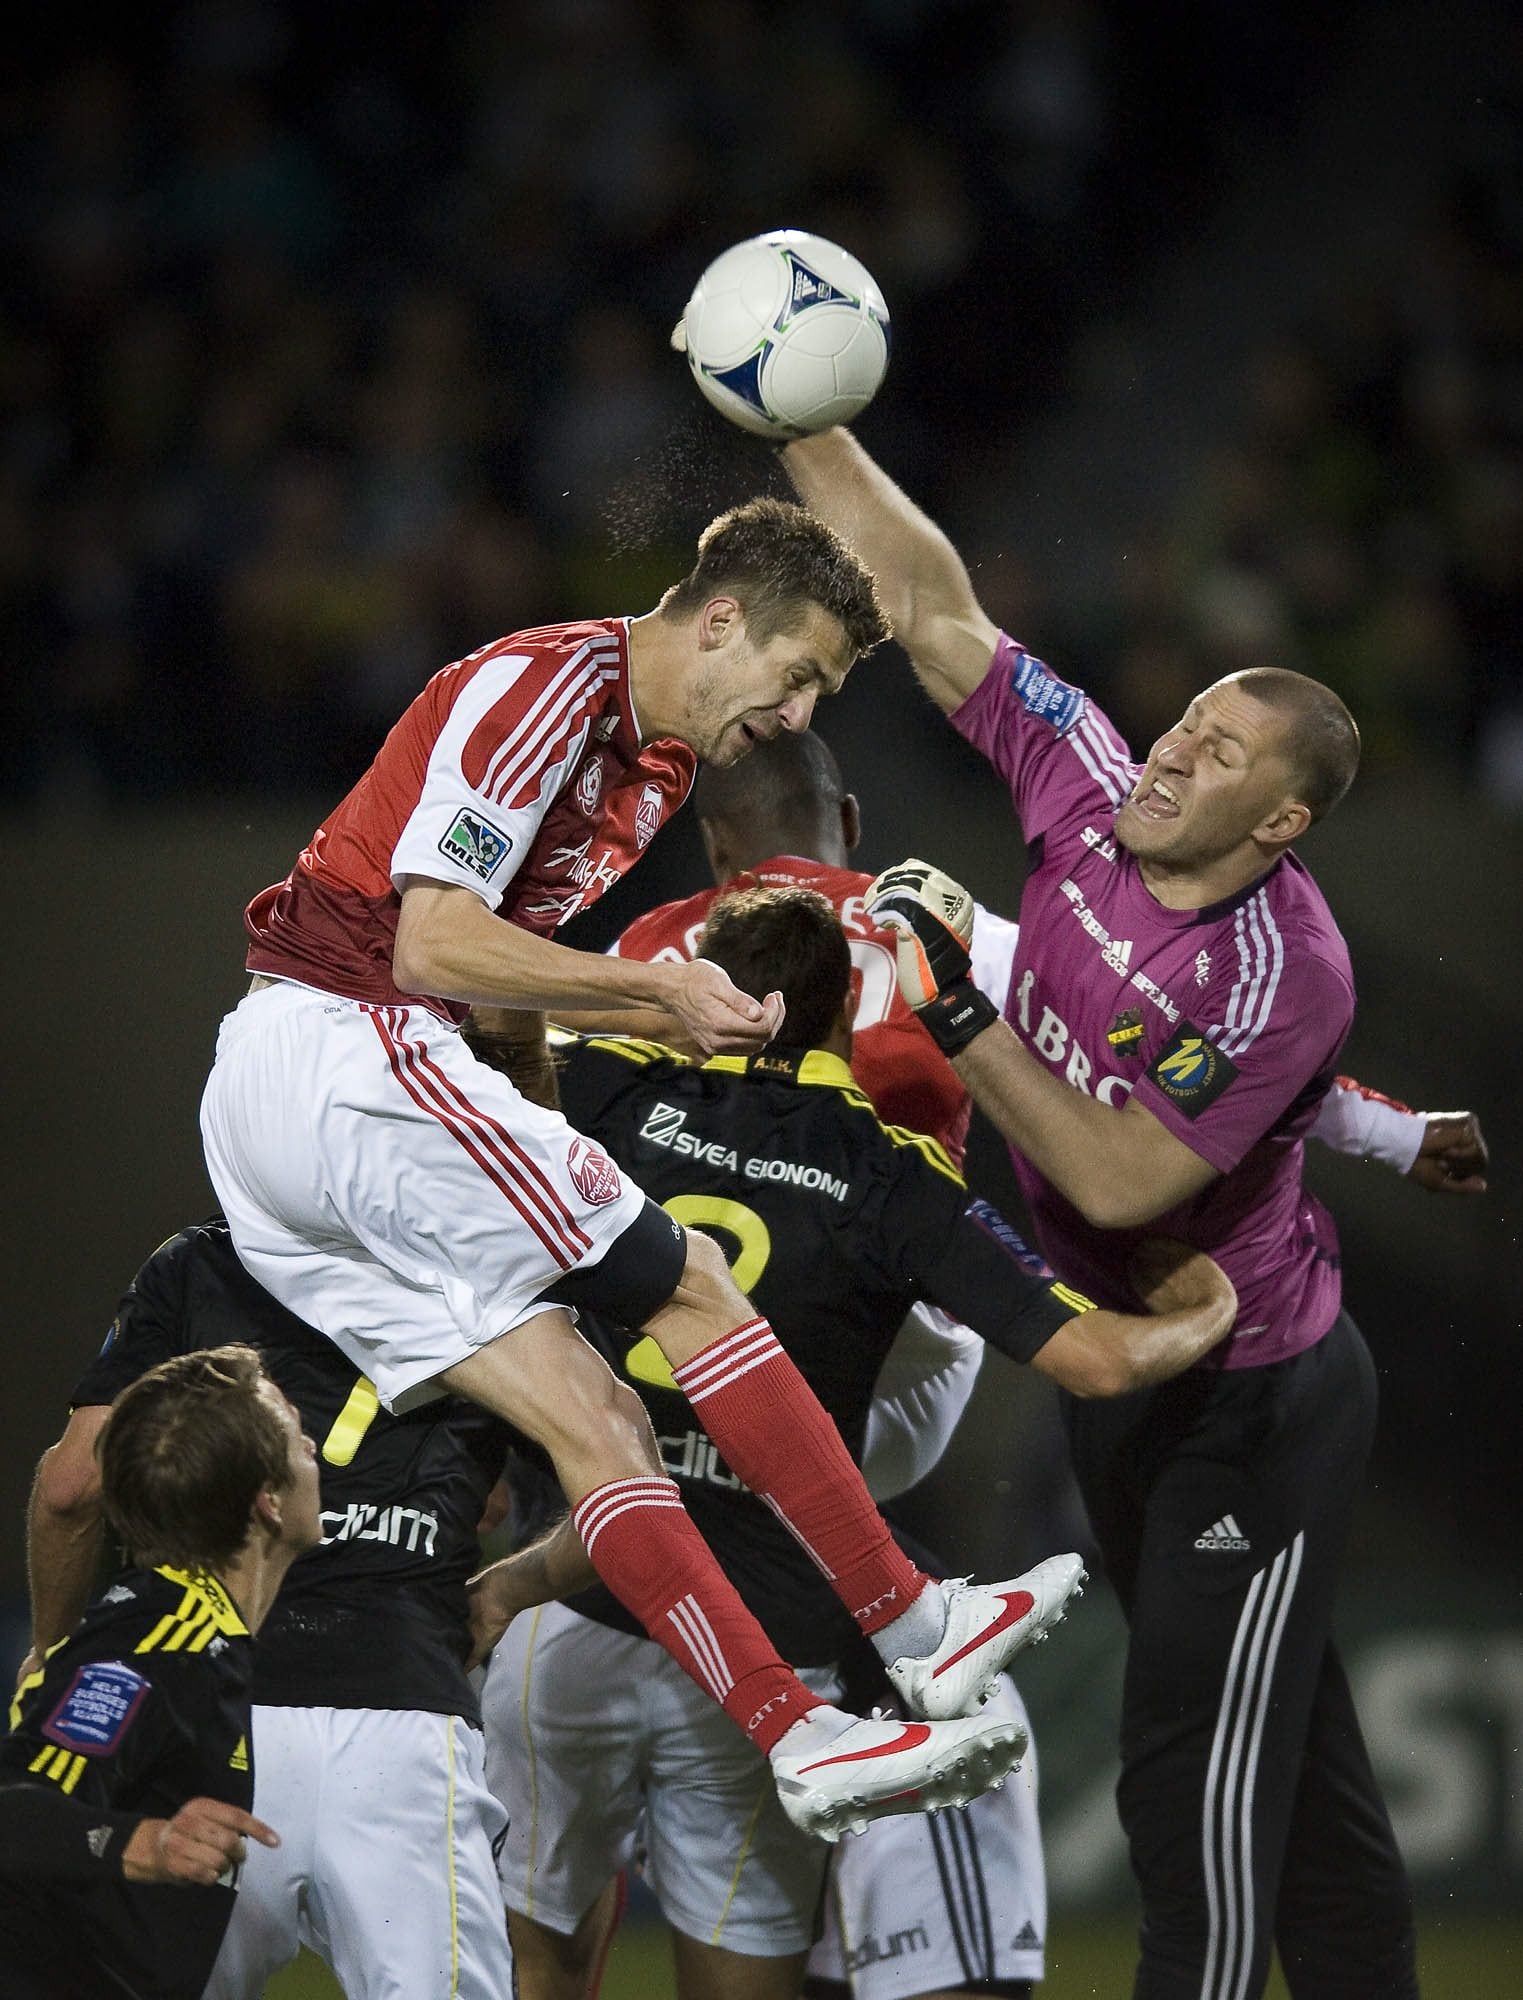 The Timbers' Eric Brunner can't beat Sweden AIK's goalkeeper Ivan Turina to the ball in the second half of Portland's 1-0 victory in exhibition play.